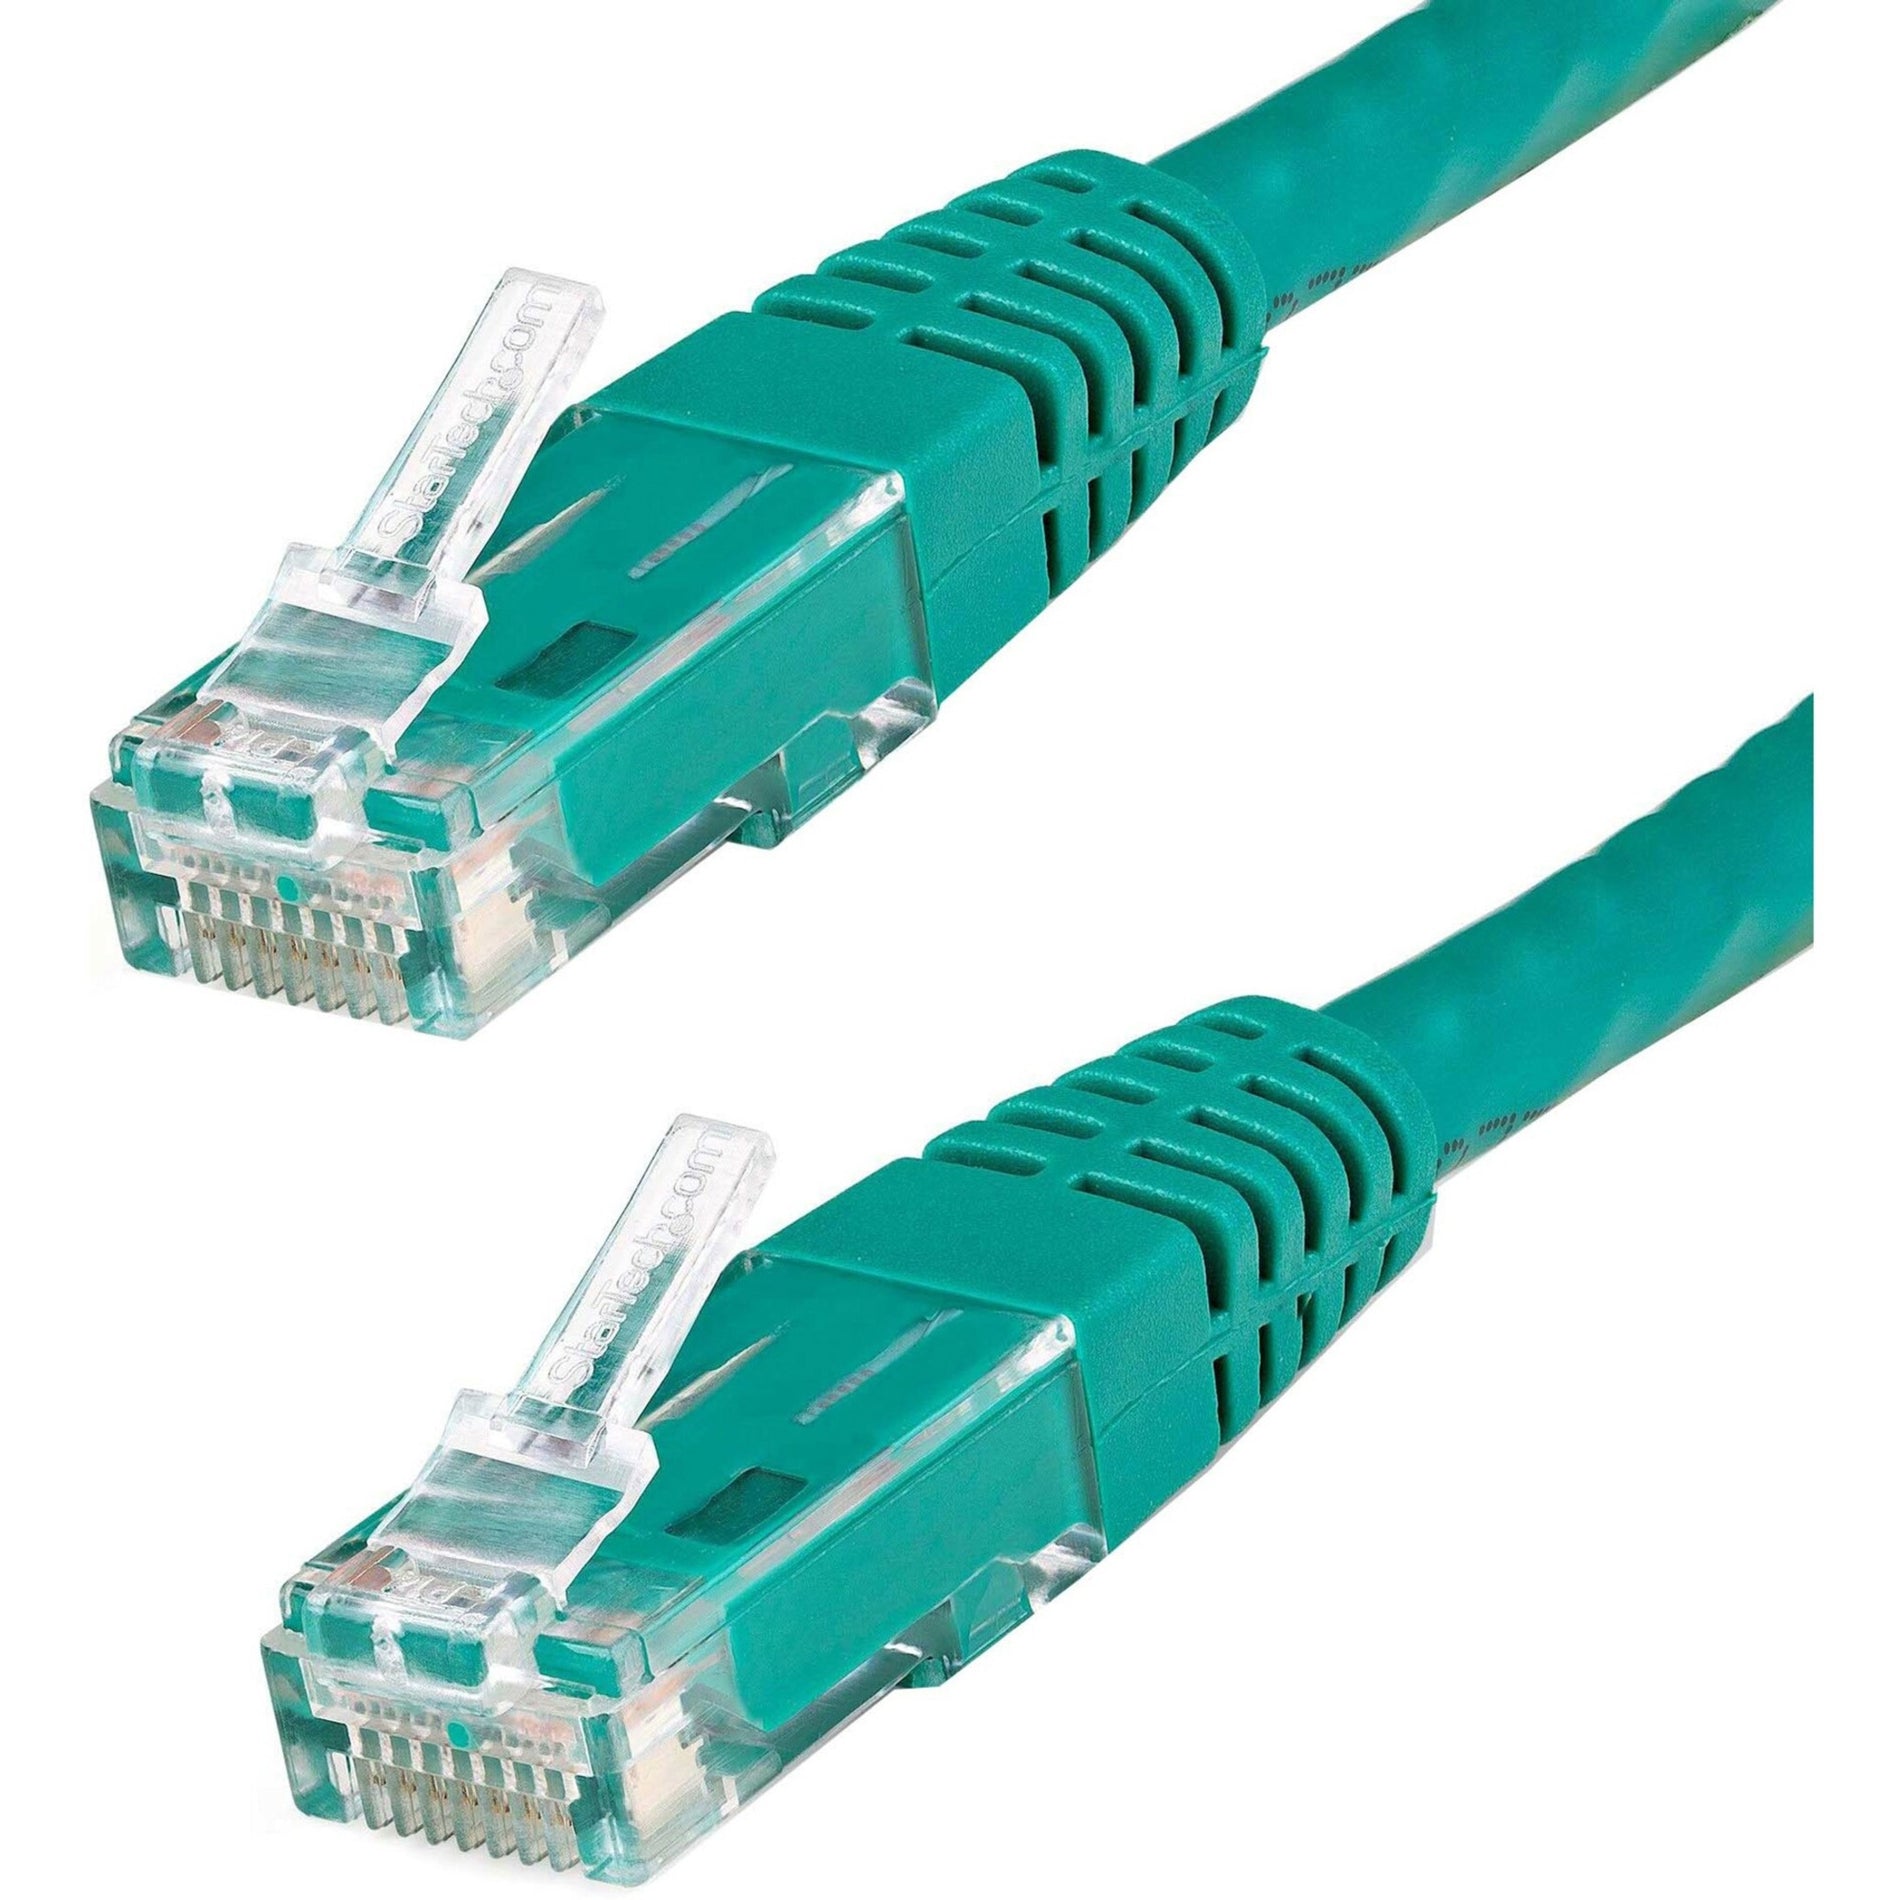 StarTech.com C6PATCH10GN 10ft Green Cat6 UTP Patch Cable ETL Verified, Strain Relief, Corrosion Resistant, Molded, PoE, Damage Resistant, 10 Gbit/s Data Transfer Rate